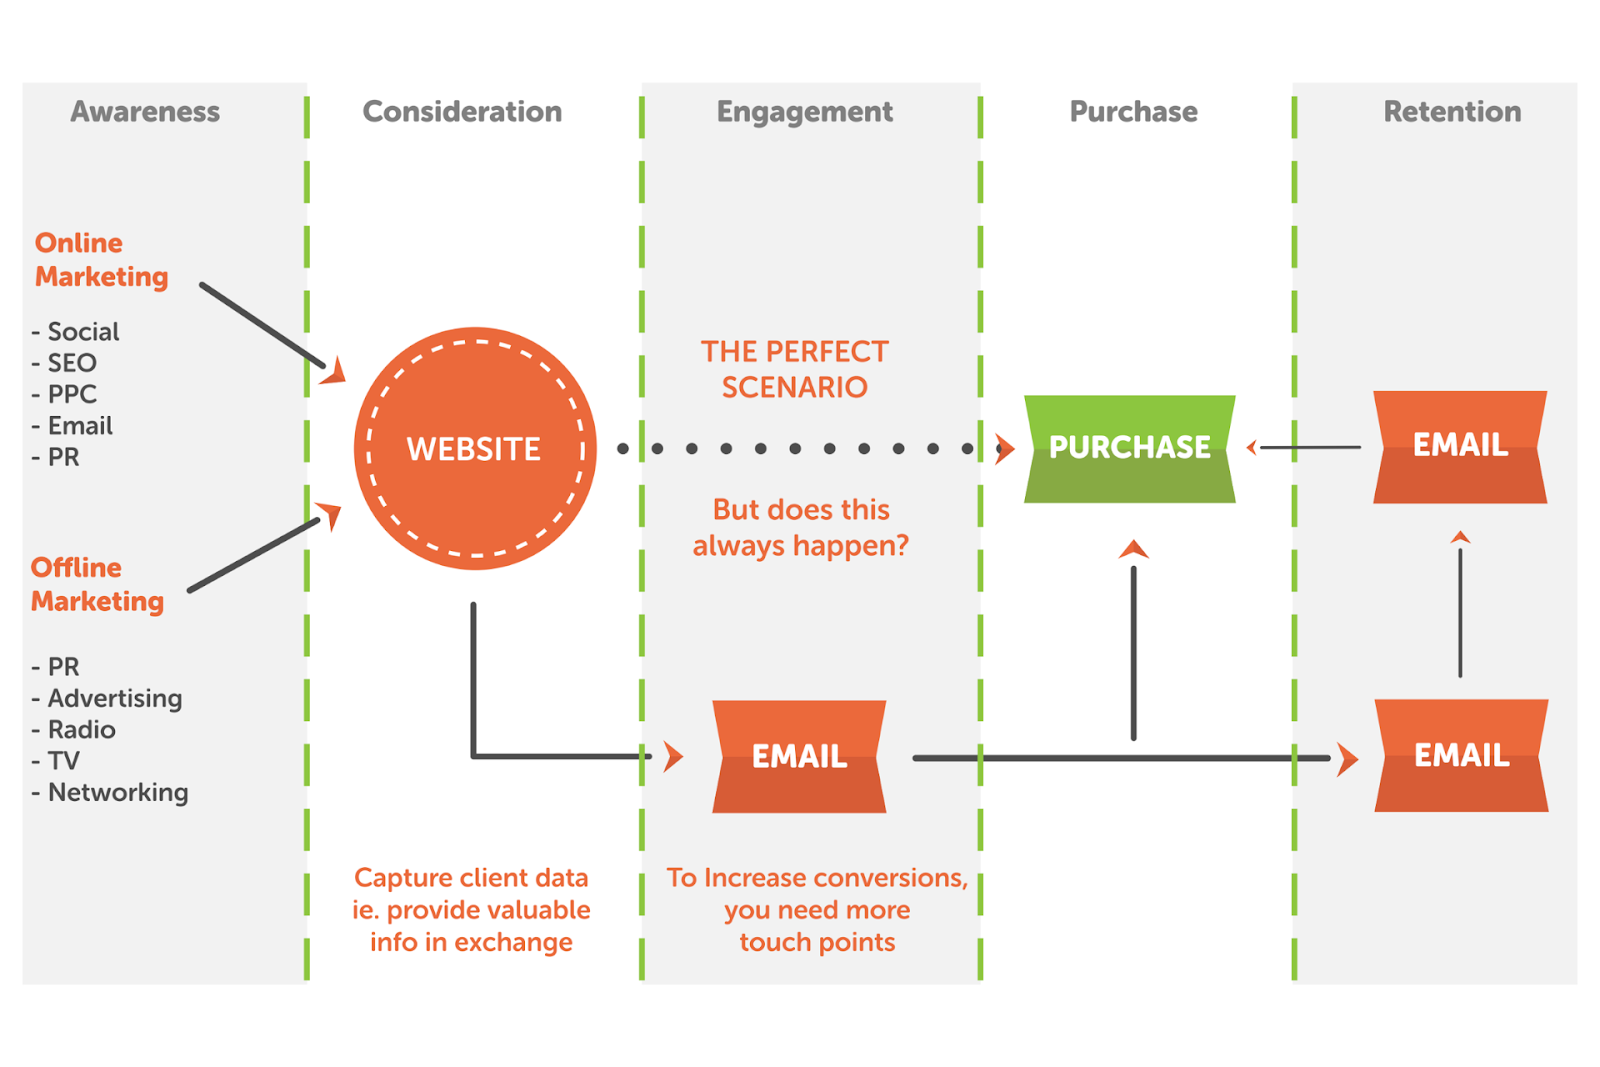 How marketing plays a part in the buyer journey.